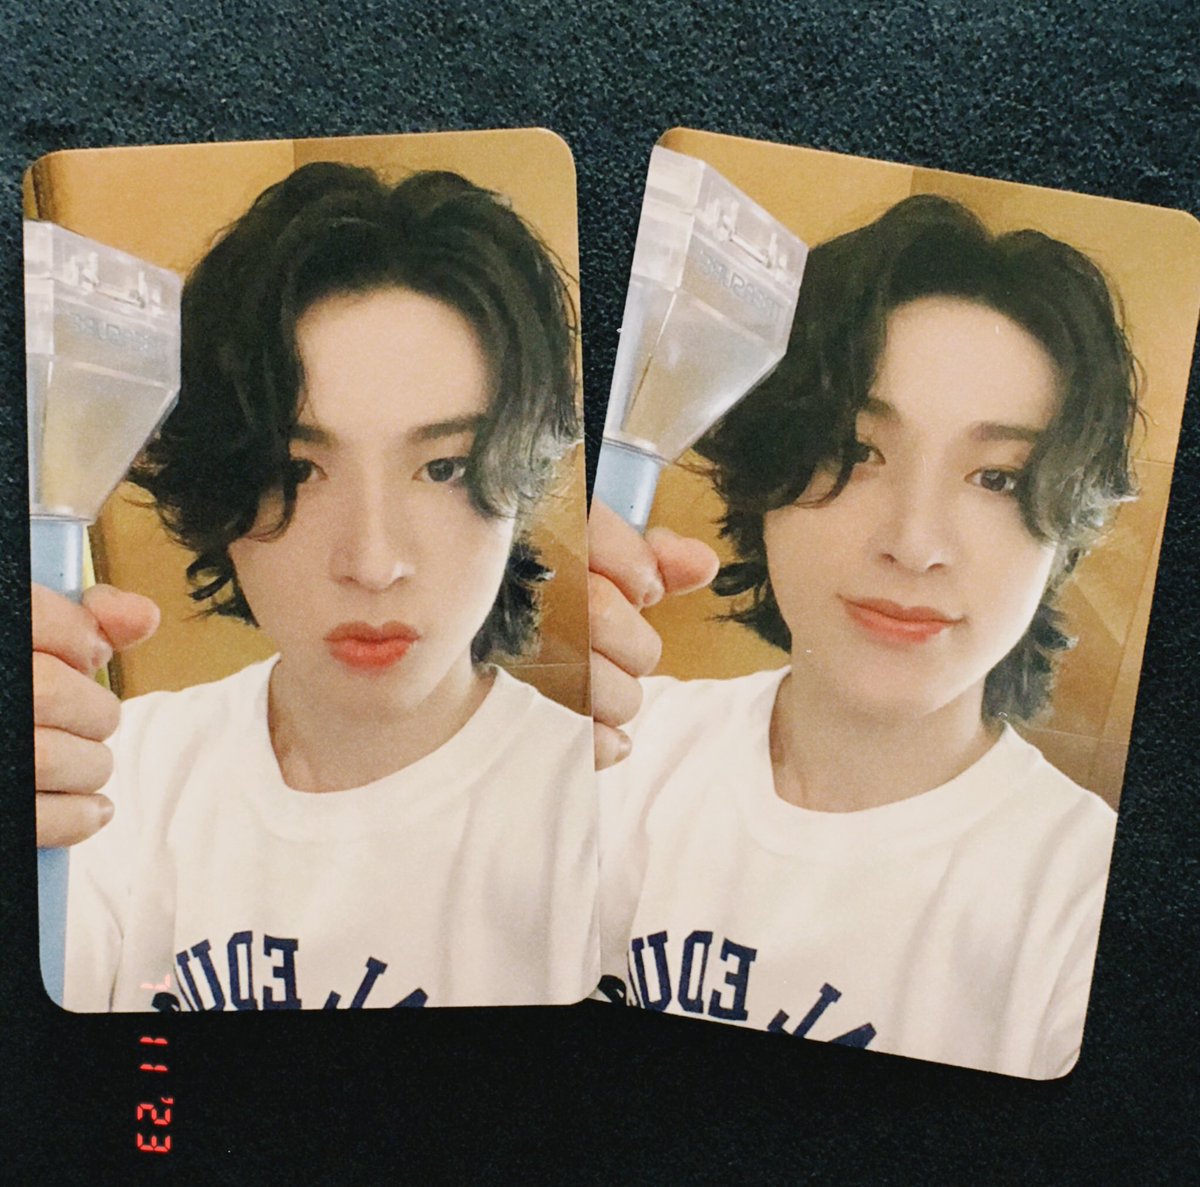 thanks @summerbyjunee the pc’s arrived safely 🥹🫶🏻 hwan is such a cutie 🩵